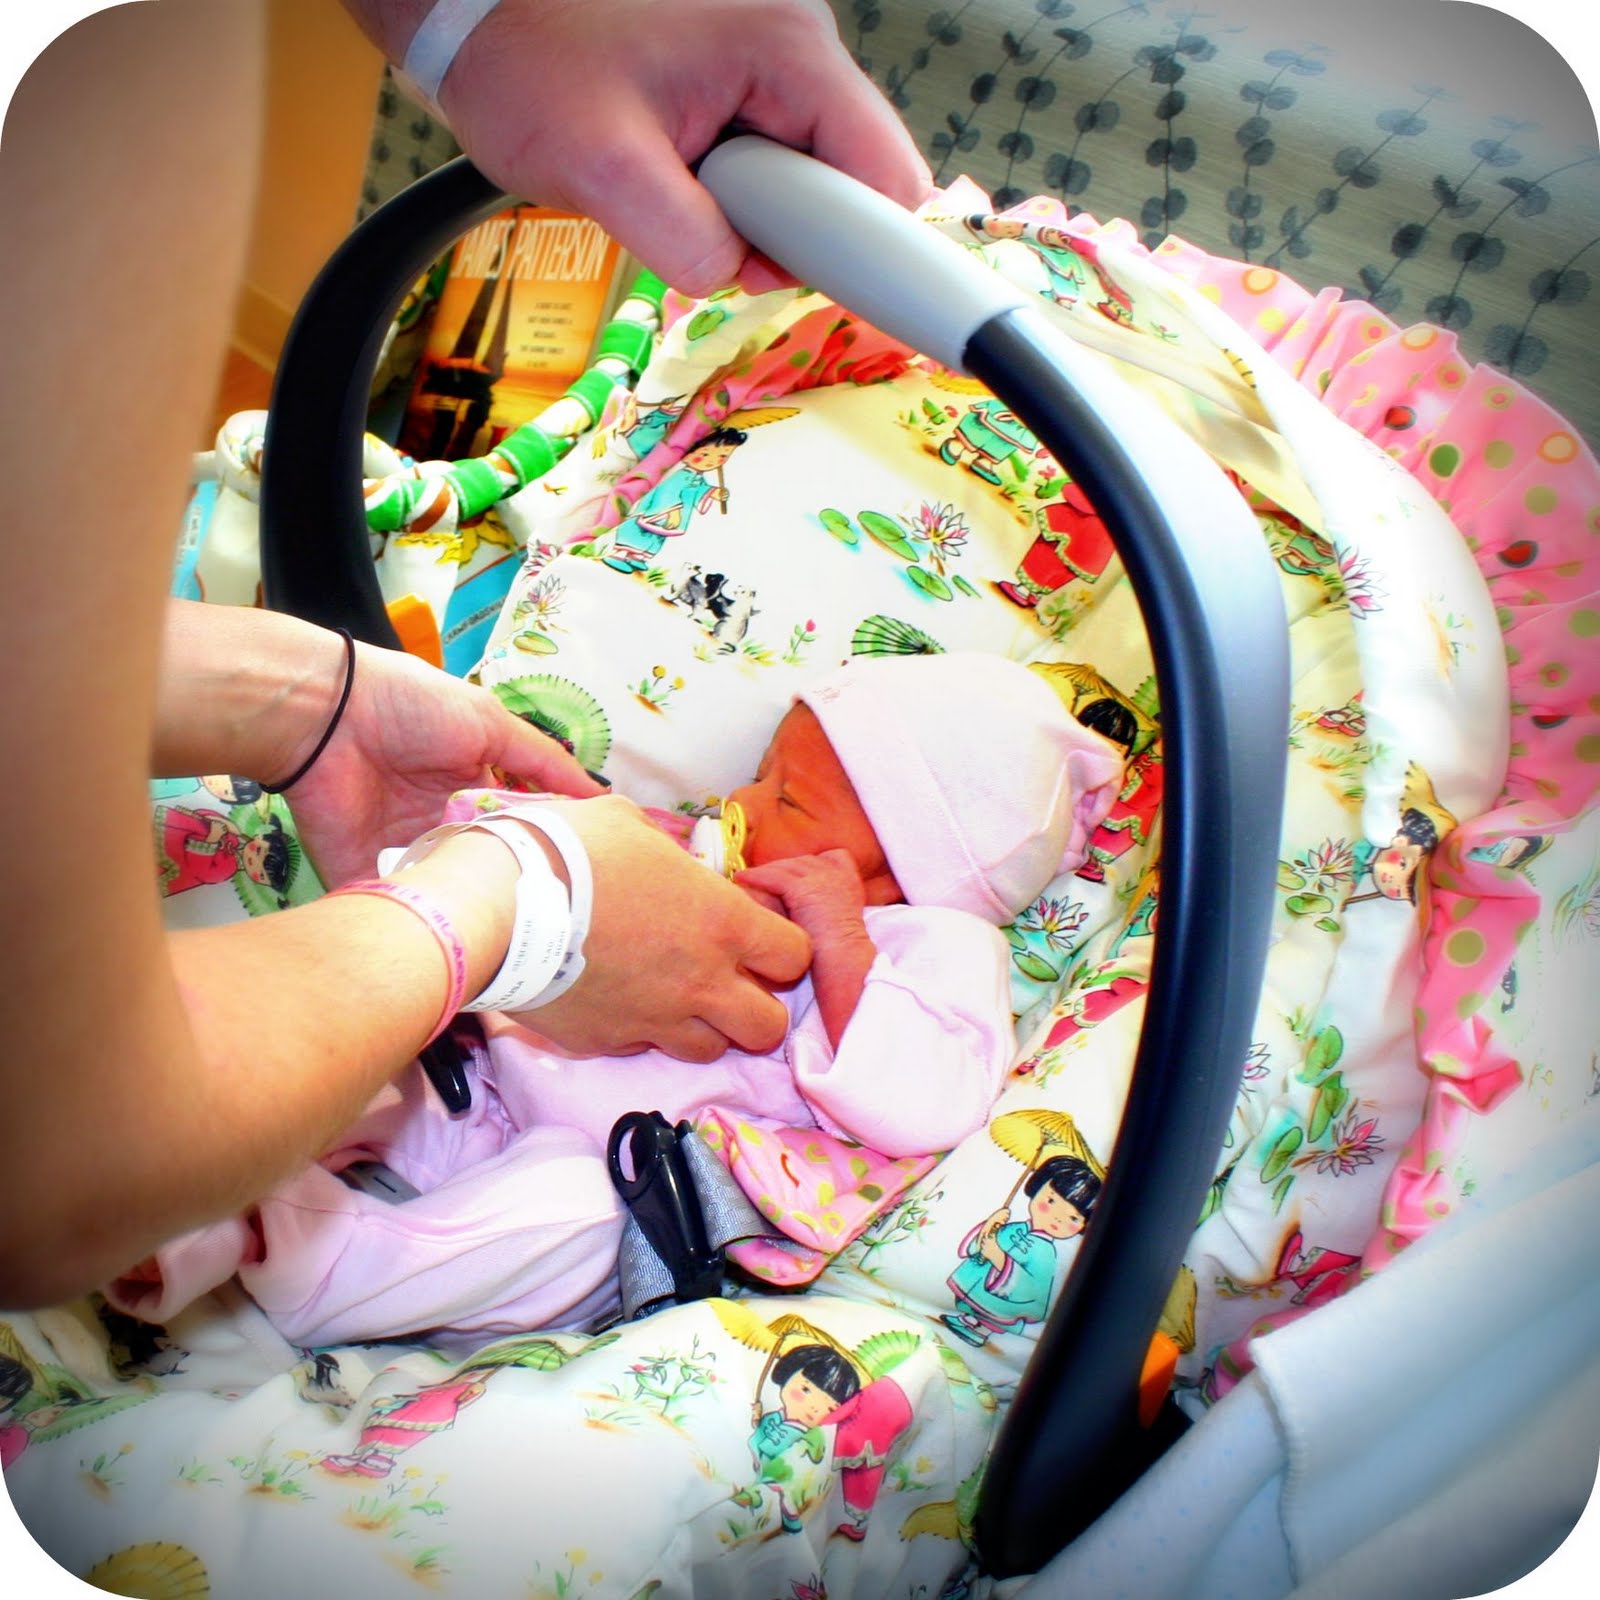 The Unbiased Guide for the New Mom: Best Car Seat: Infant Seat vs